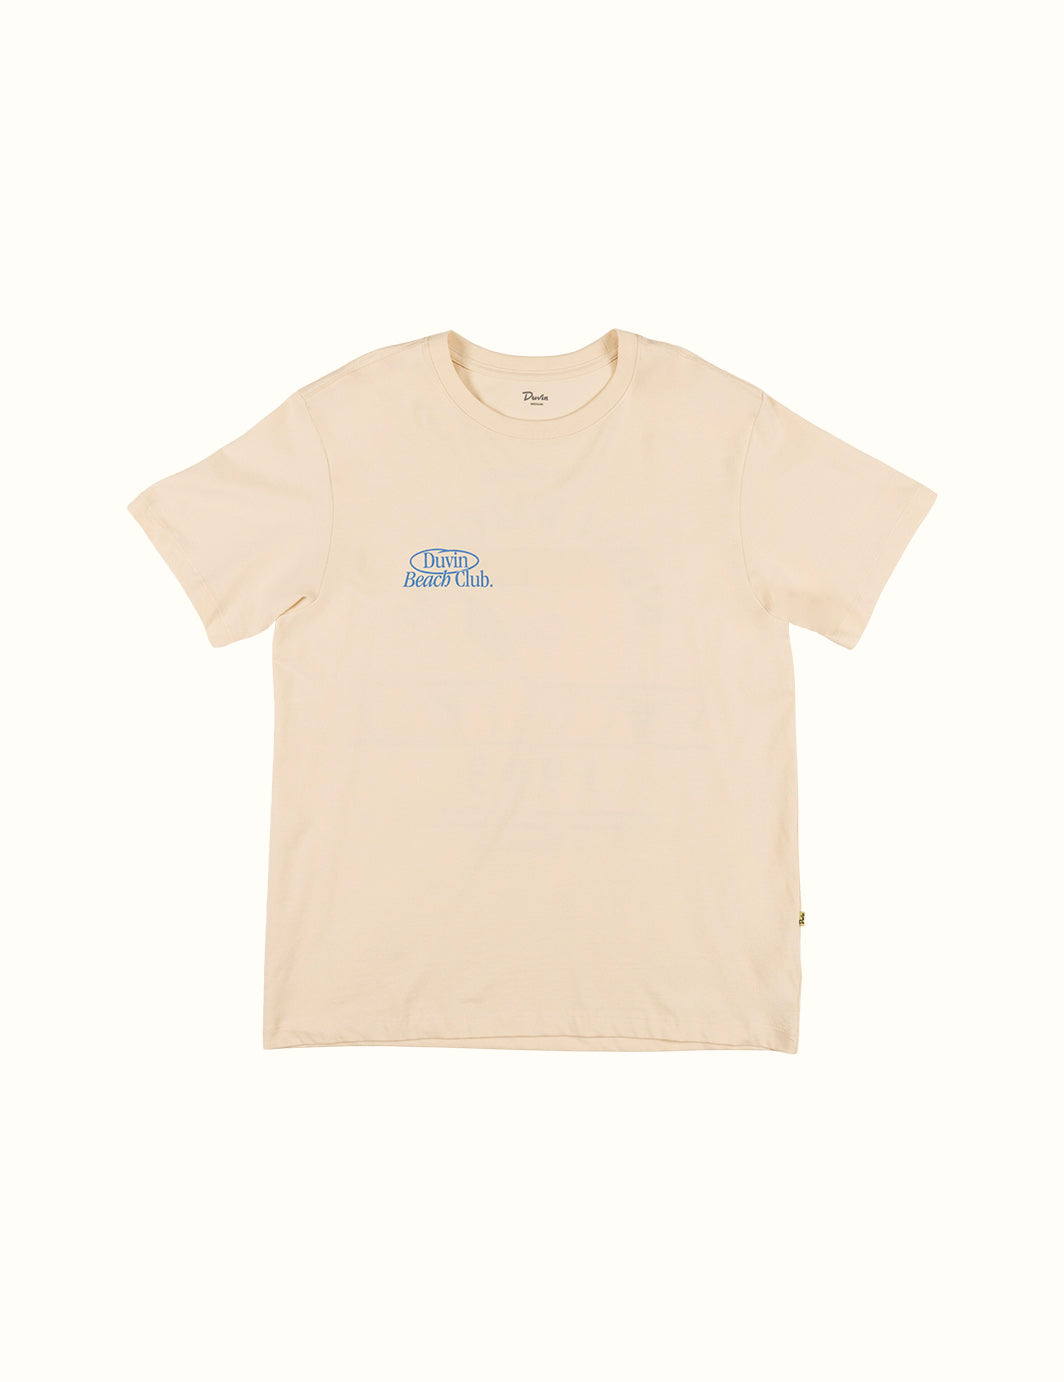 Members Only Tee - Natural